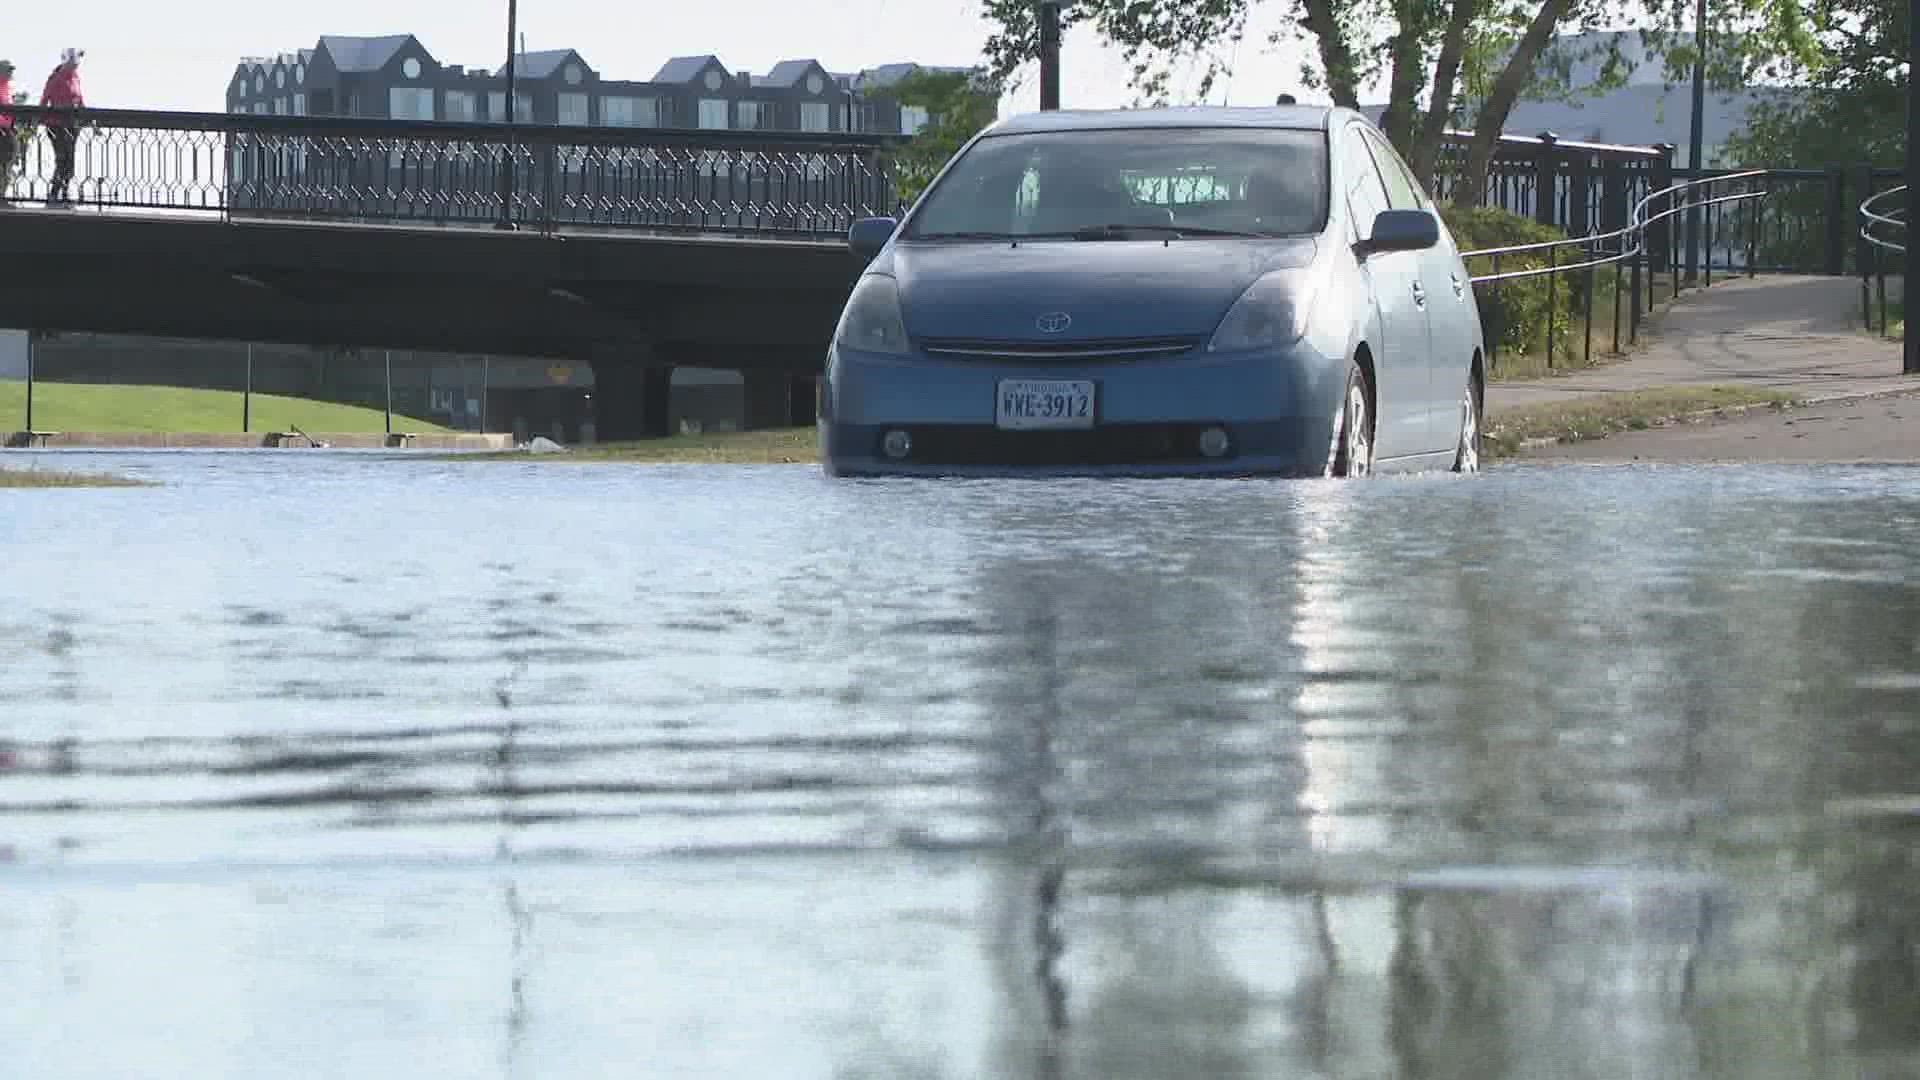 A new report from ODU shows that by the end of the century, increased flooding could result in nearly $80 billion in damages in Hampton Roads and Virginia.